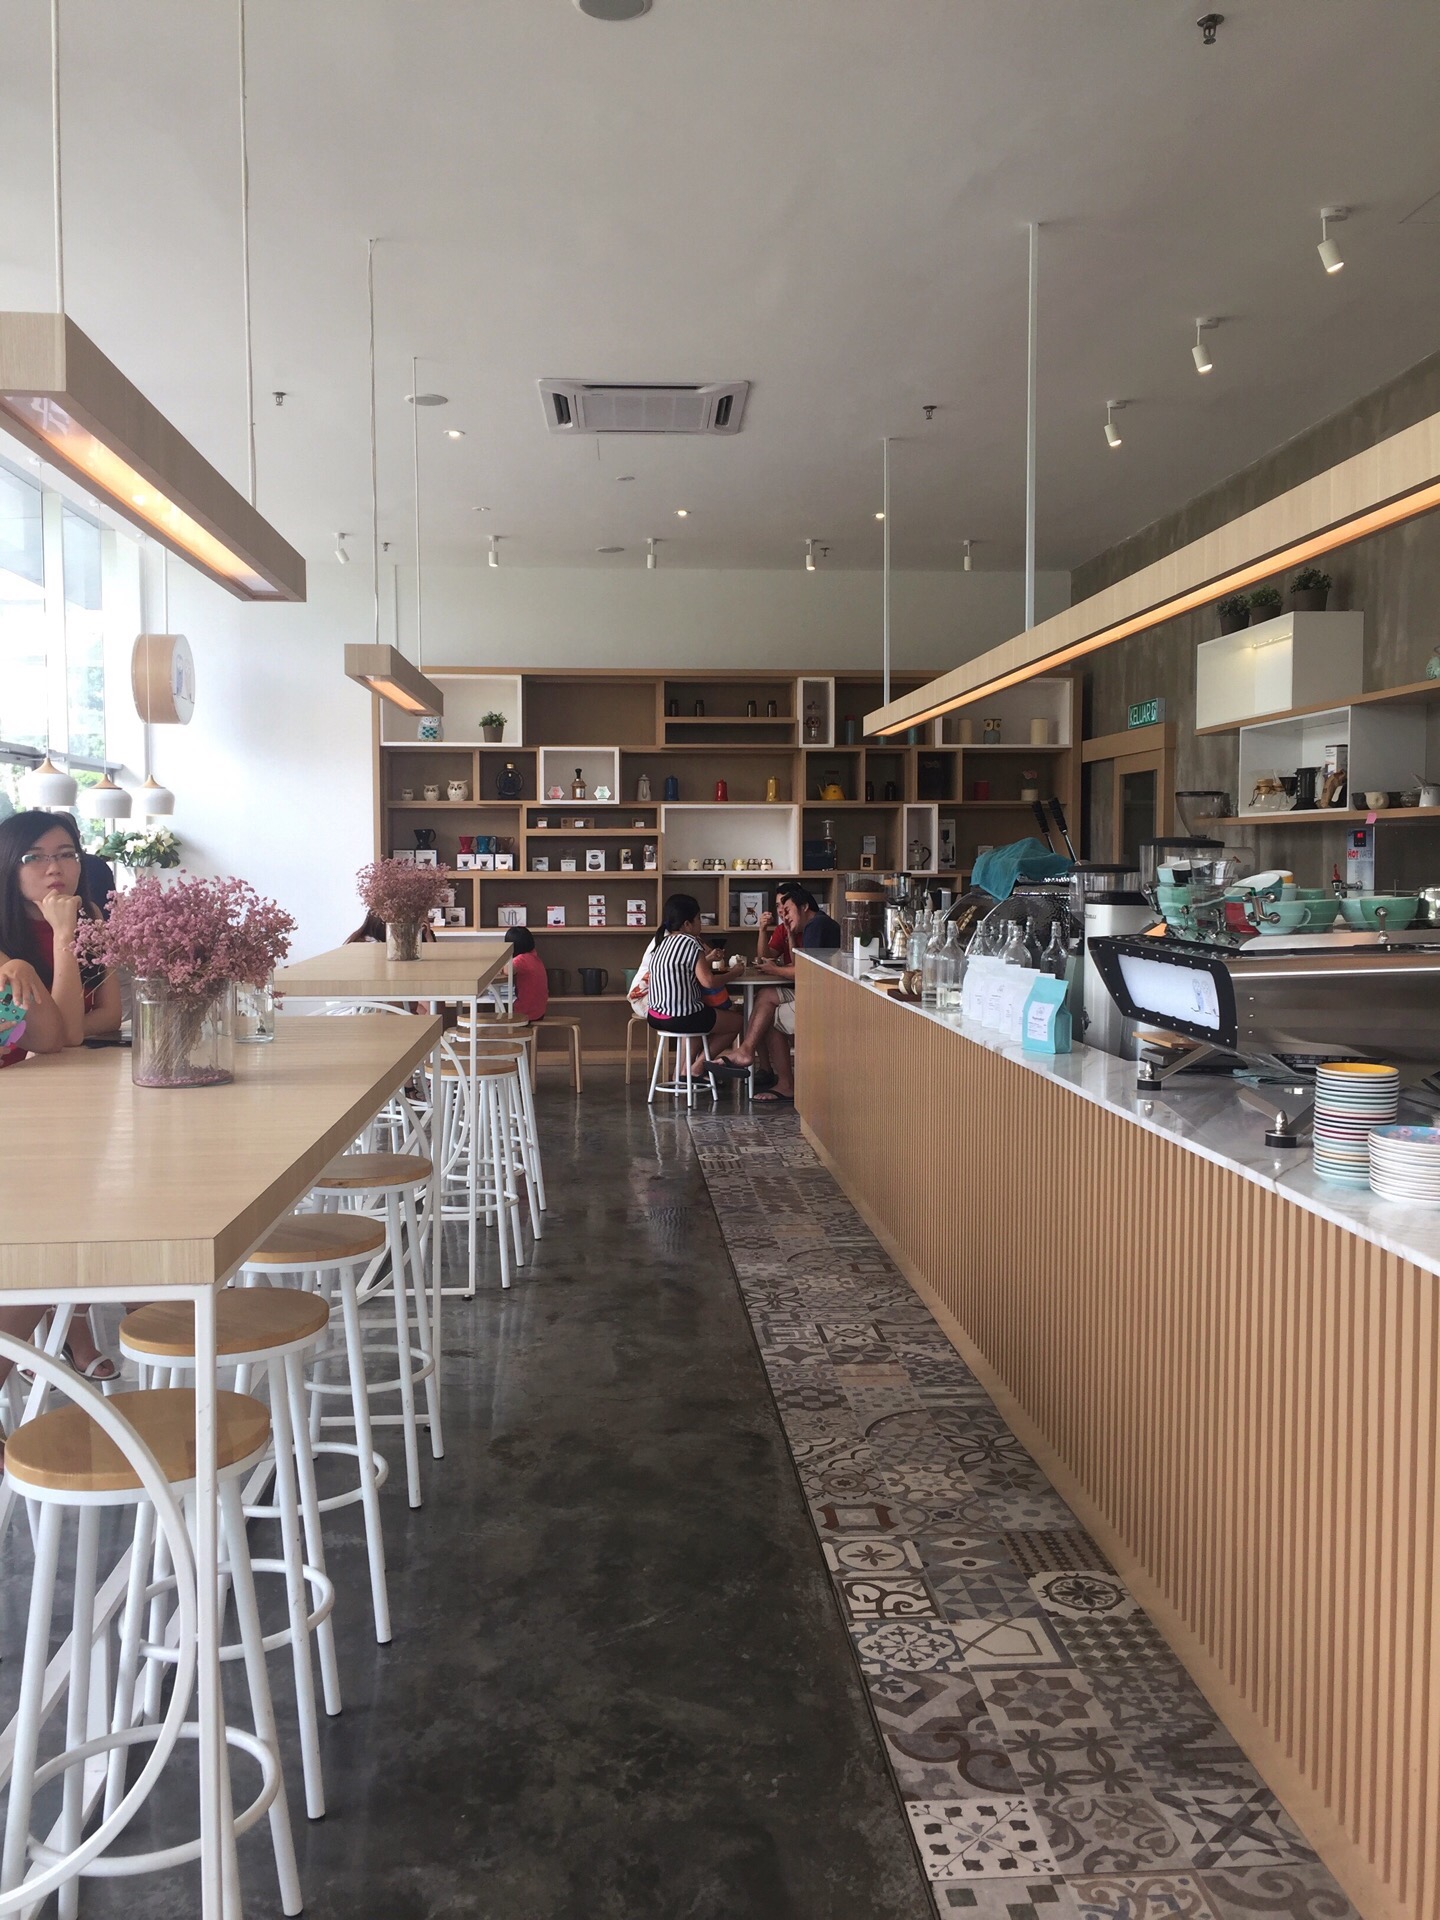 Top 5 Cafes You Need to Visit at Bukit Jalil!